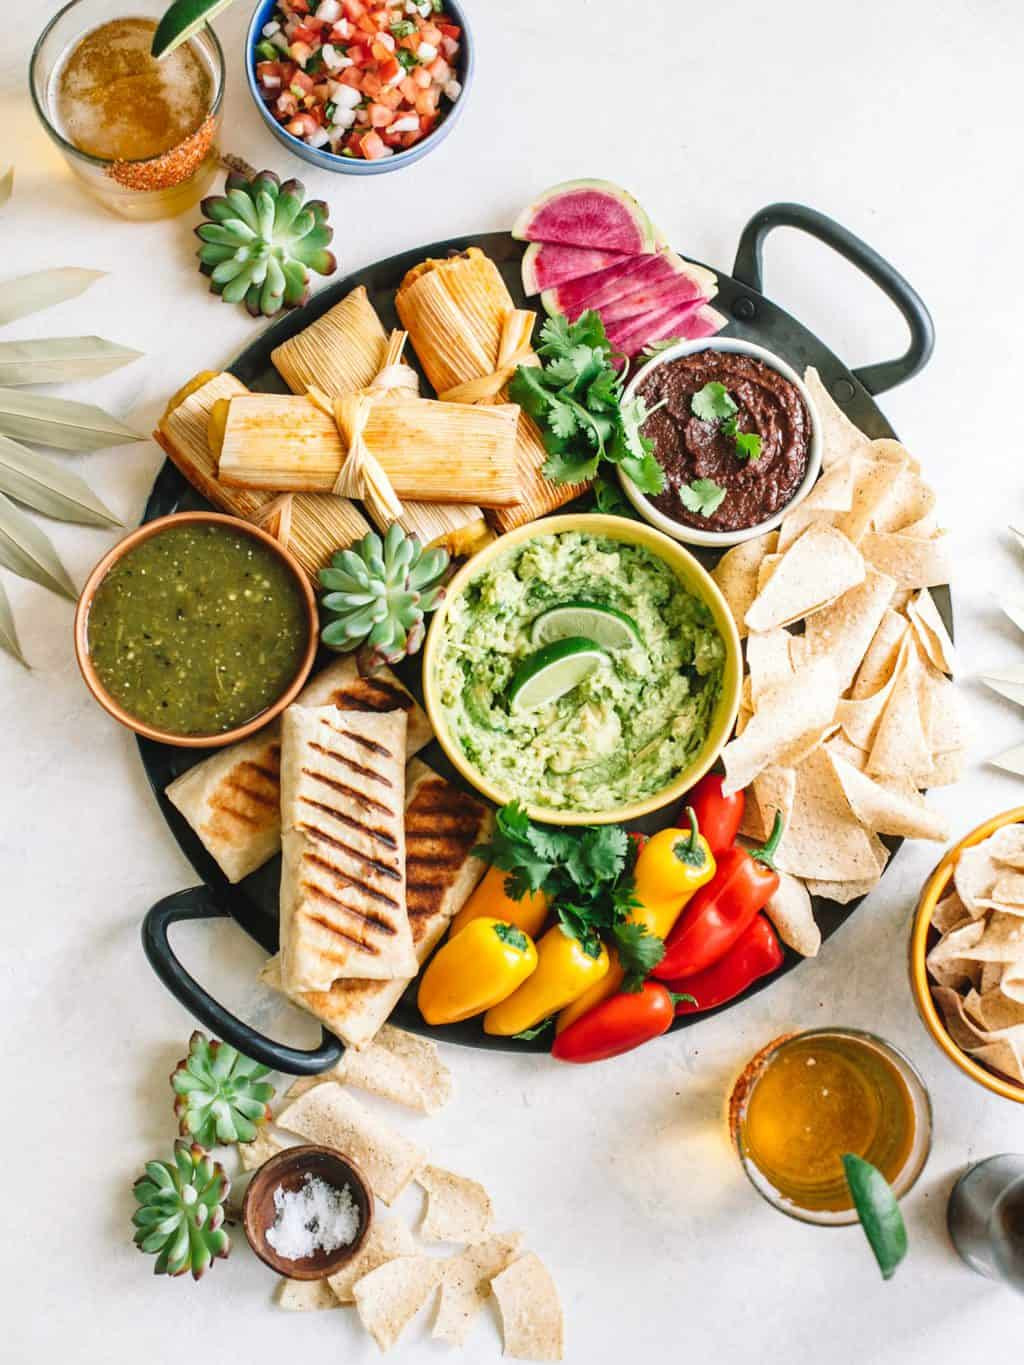 Healthy Mexican Appetizers Luxury Mexican Appetizer Snack Platter College Housewife Of Healthy Mexican Appetizers 